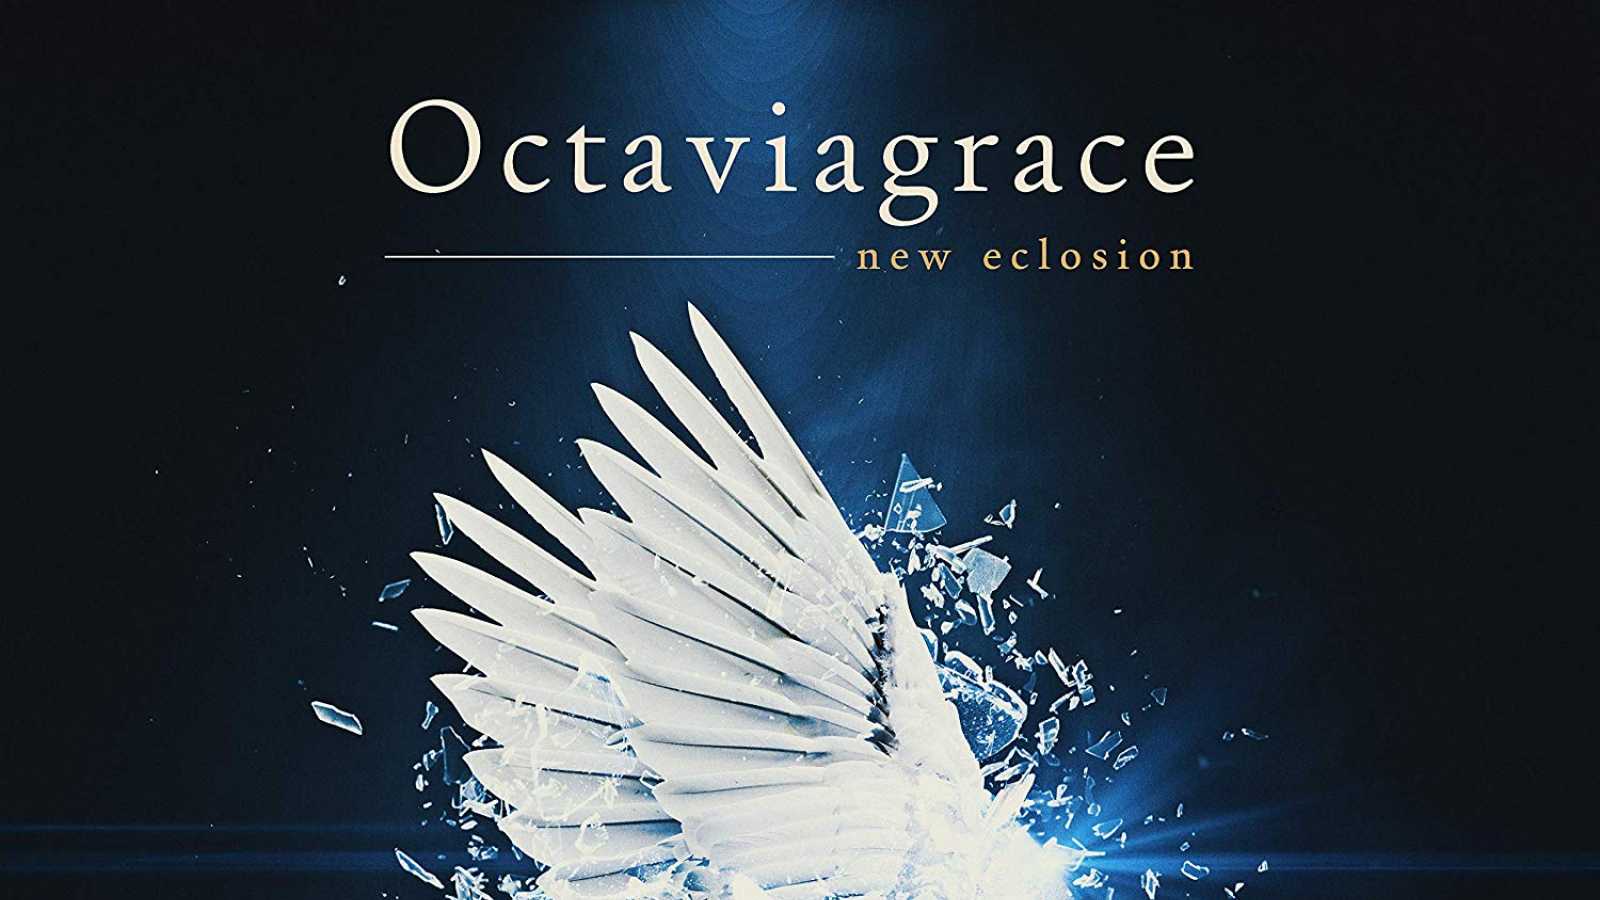 ﻿Octaviagrace - new eclosion © Faith, Inc. All rights reserved.